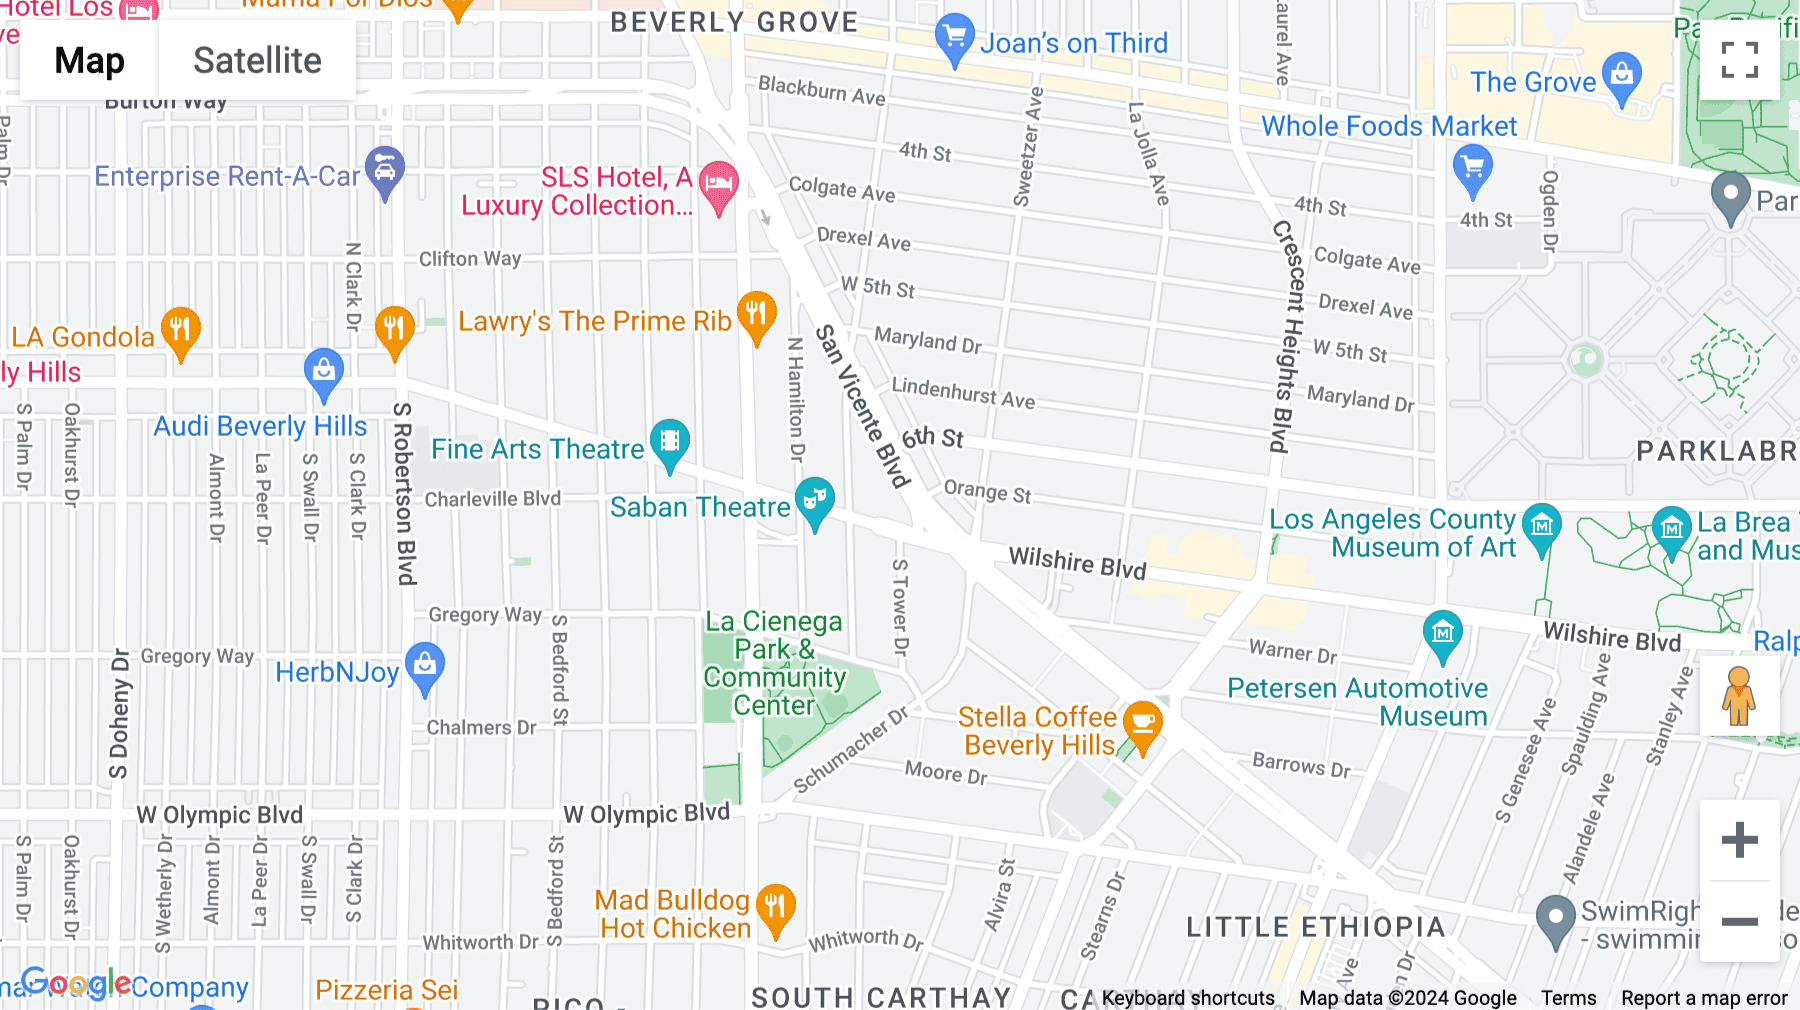 Click for interative map of 8383 Wilshire Blvd., Suite 800, Beverly Hills, Los Angeles, California, Los Angeles